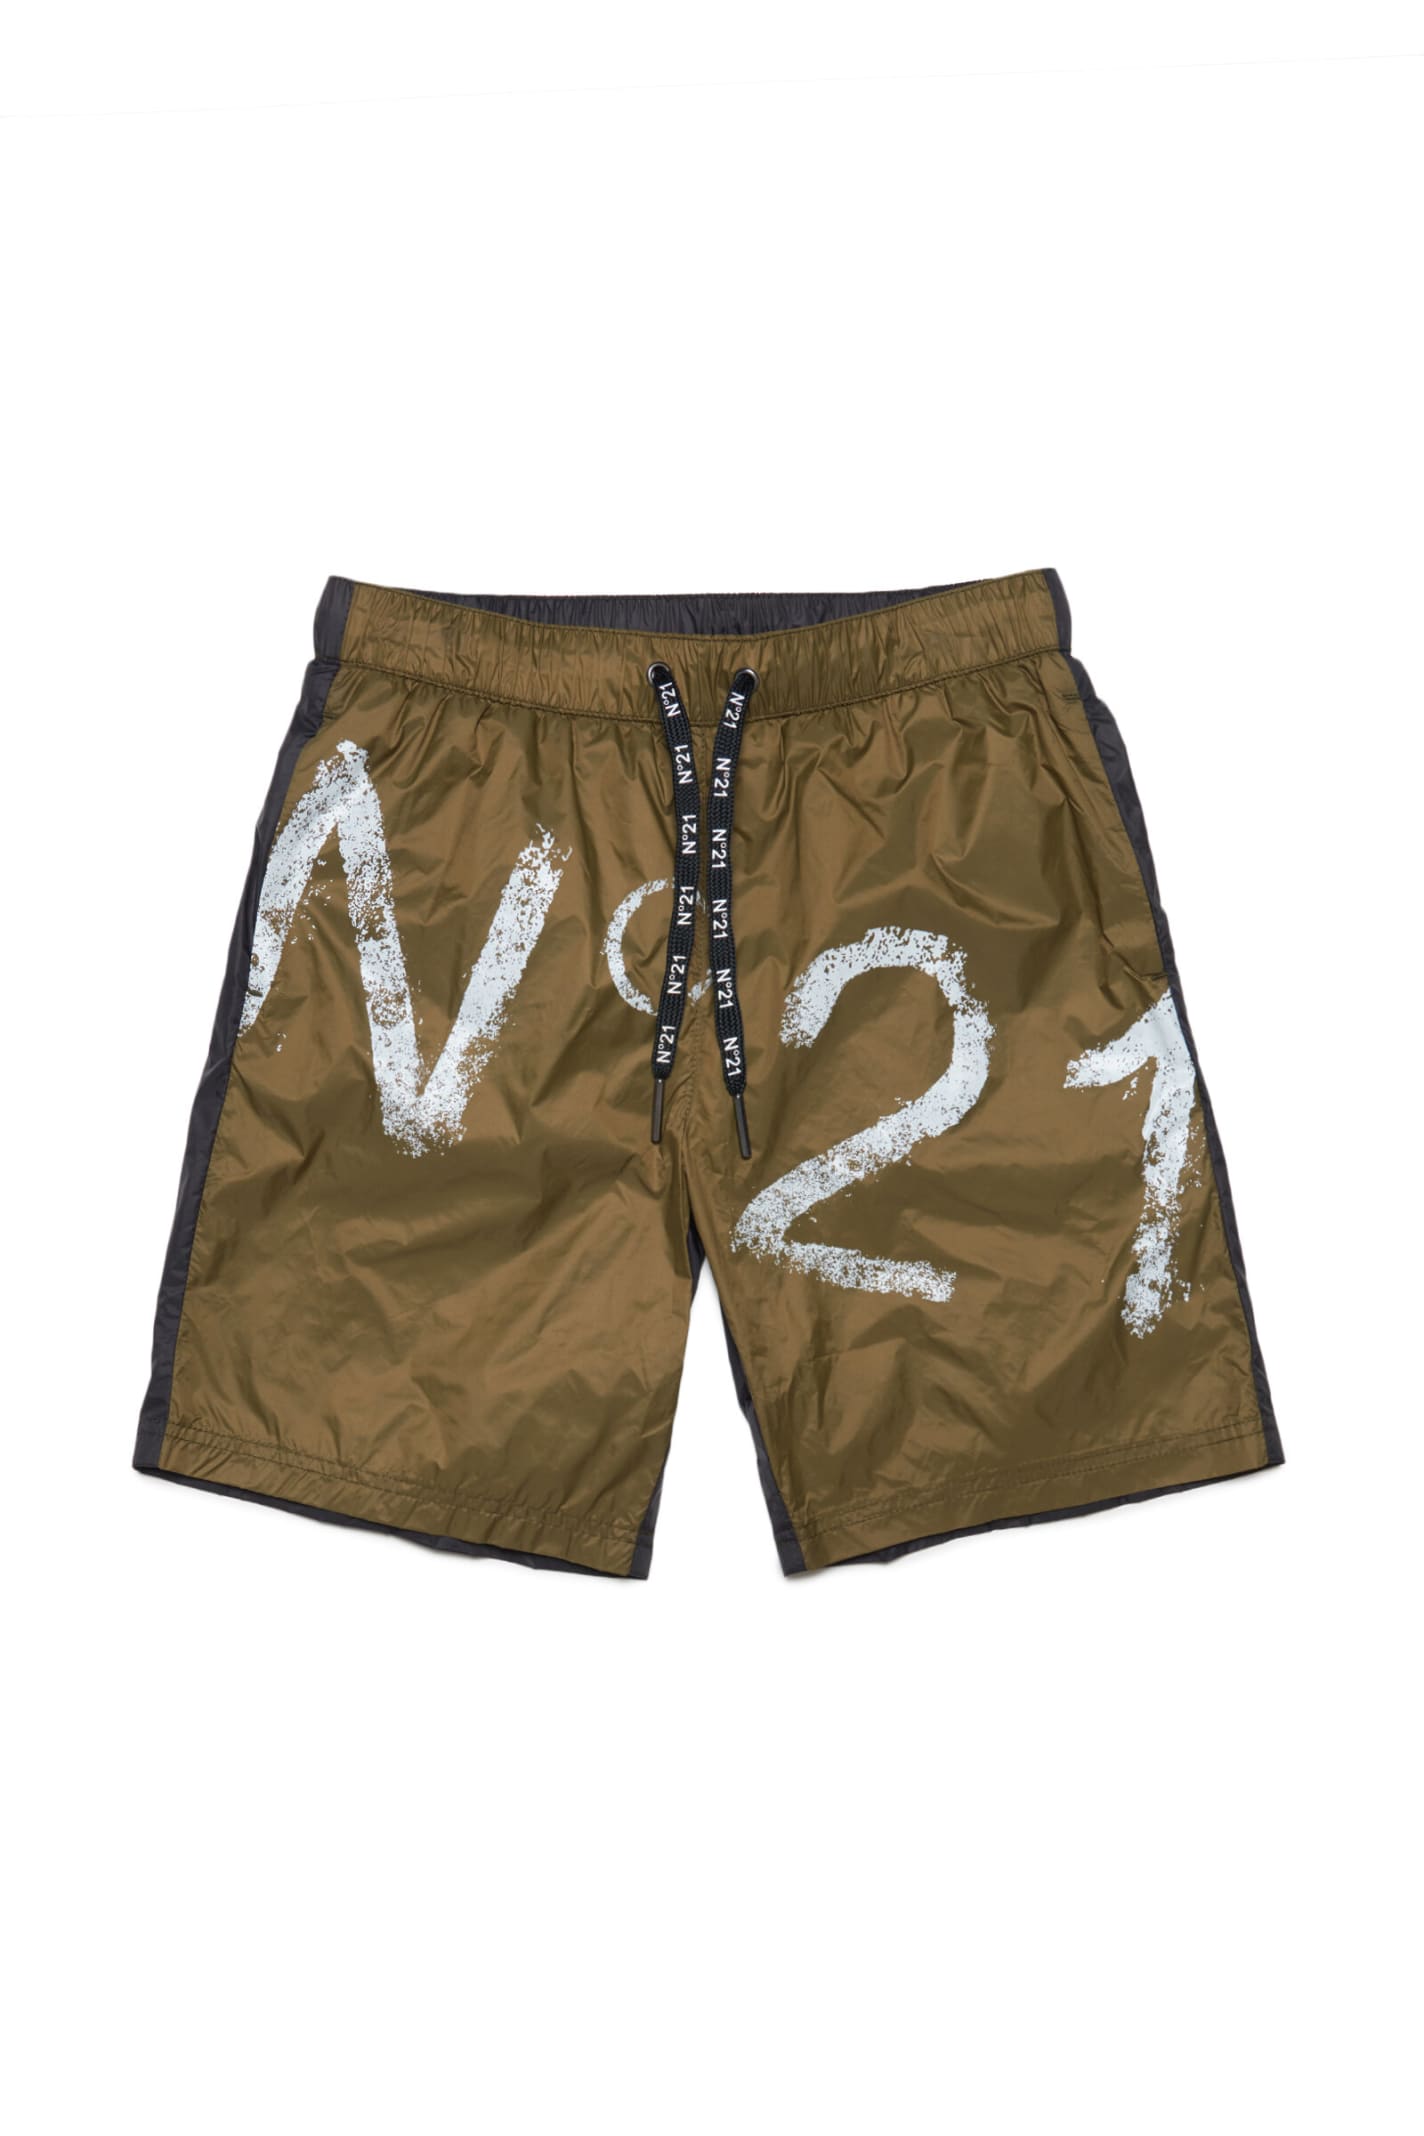 N°21 N21M17M SW BOXER N°21 GREEN AND BLACK TWO-TONE SWIM BOXERS WITH VINTAGE LOGO